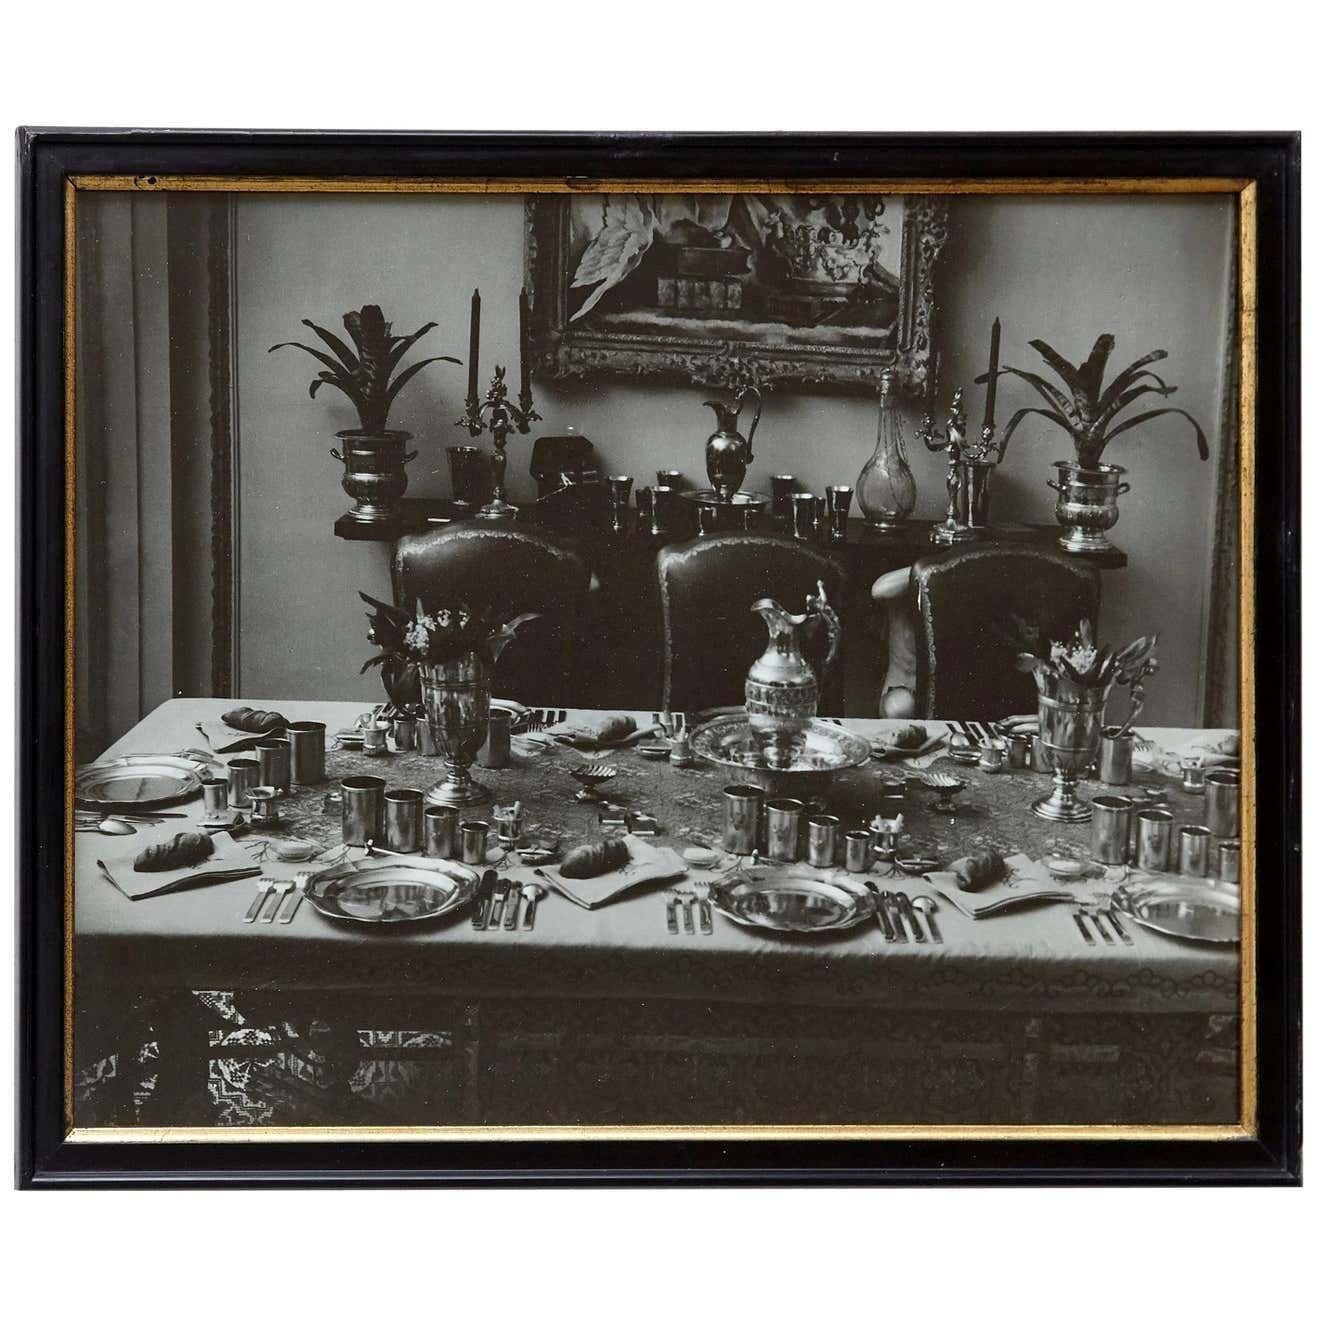 Step back in time with Brassai's captivating lens as he beautifully frames a dinner table in 1935 Paris. This black and white gelatin silver bromide photograph, stamped by the master himself, captures the essence of a bygone era, inviting you to